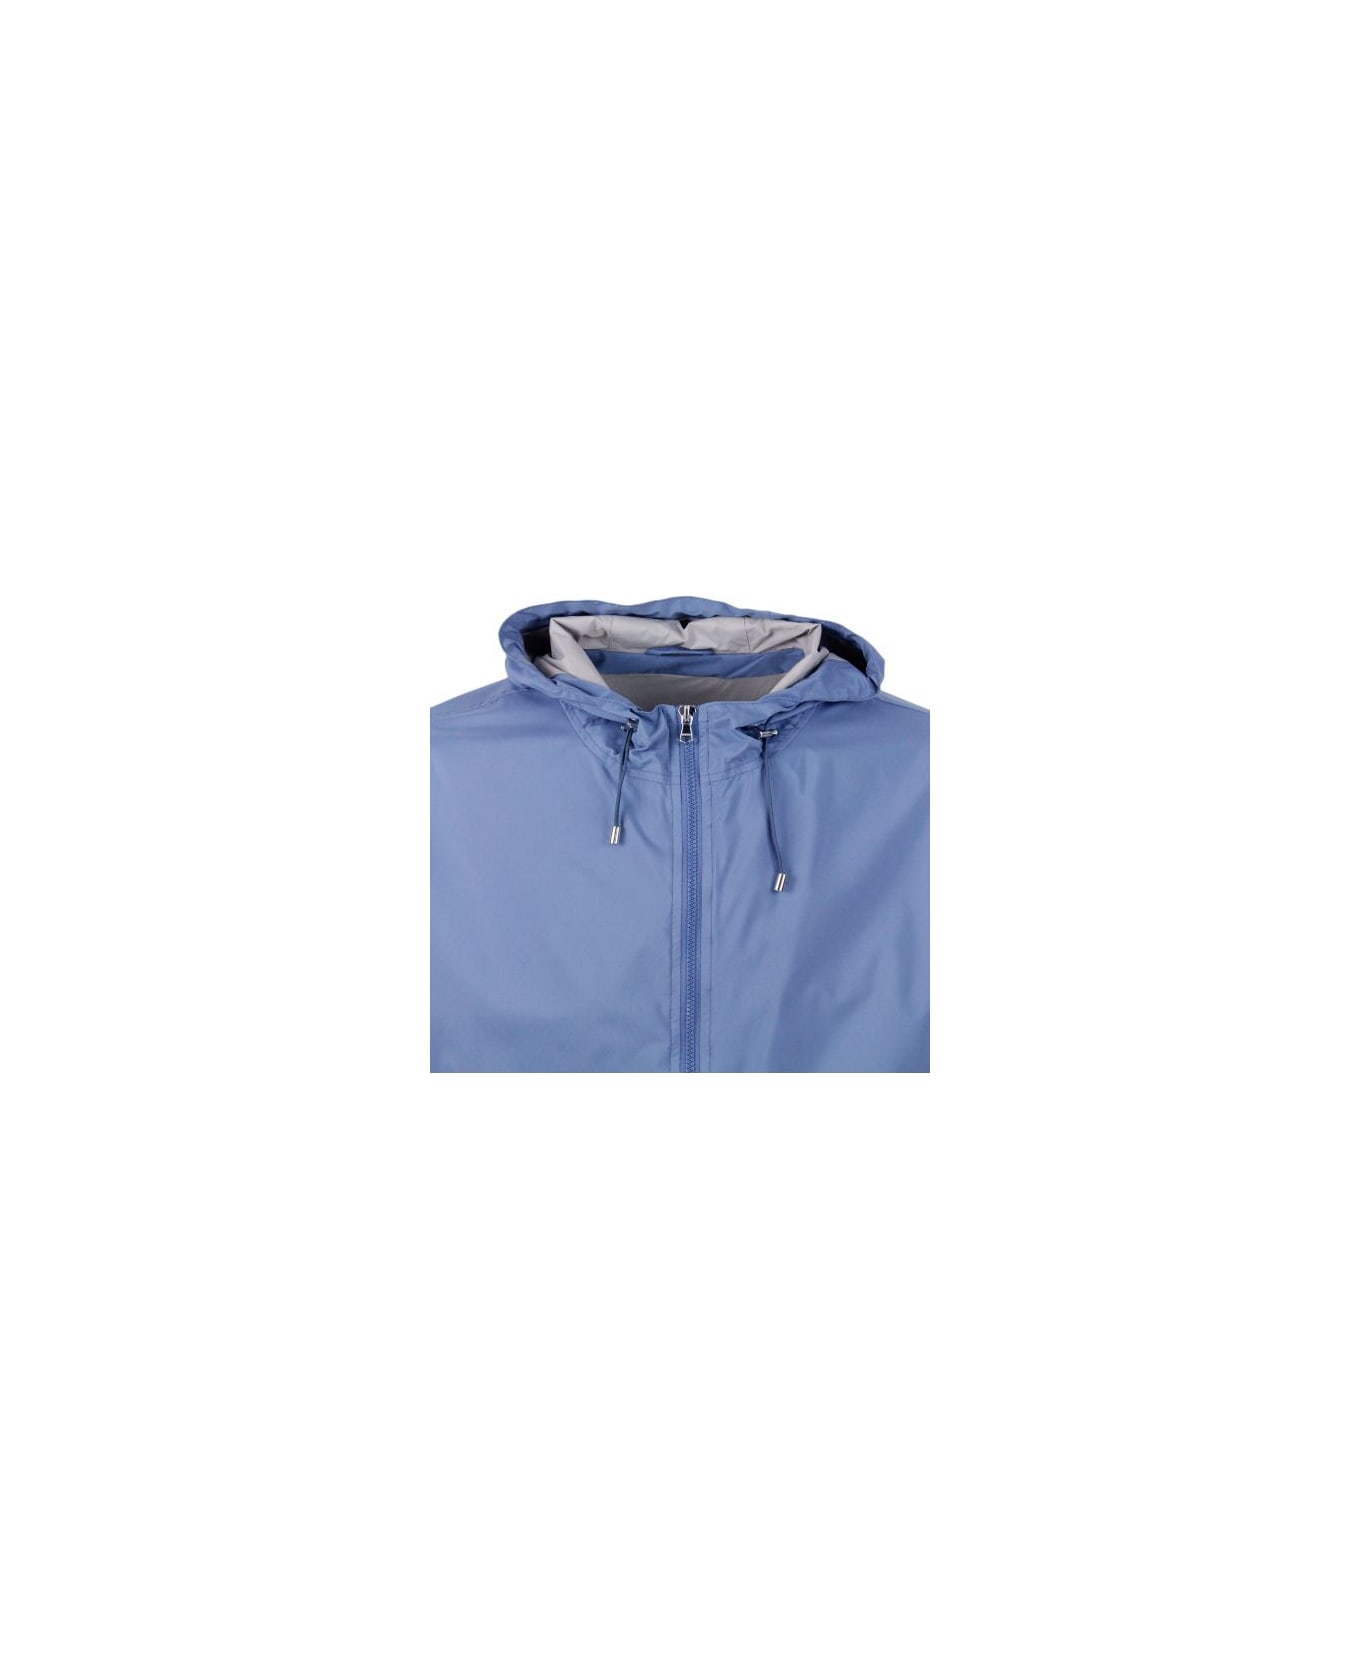 Barba Napoli Lightweight Bomber Jacket In Windproof Technical Fabric With Hood With Zip Closure And Knitted Cuffs And Bottom. - Blu light ジャケット